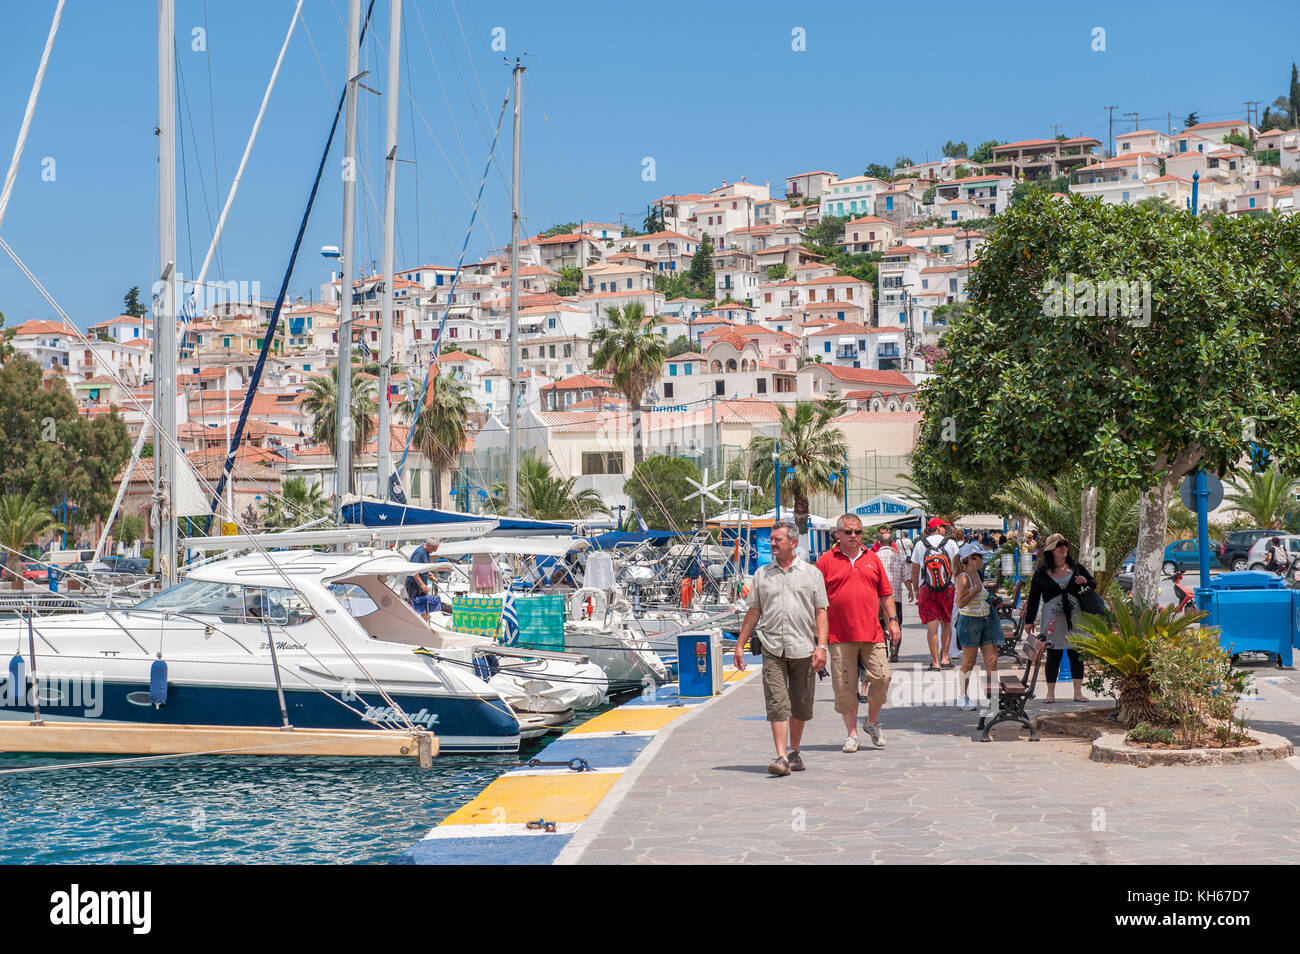 Poros on a sunny day. Poros is a small Greek island in the Aegean sea belonging to the Saronic islands. Stock Photo